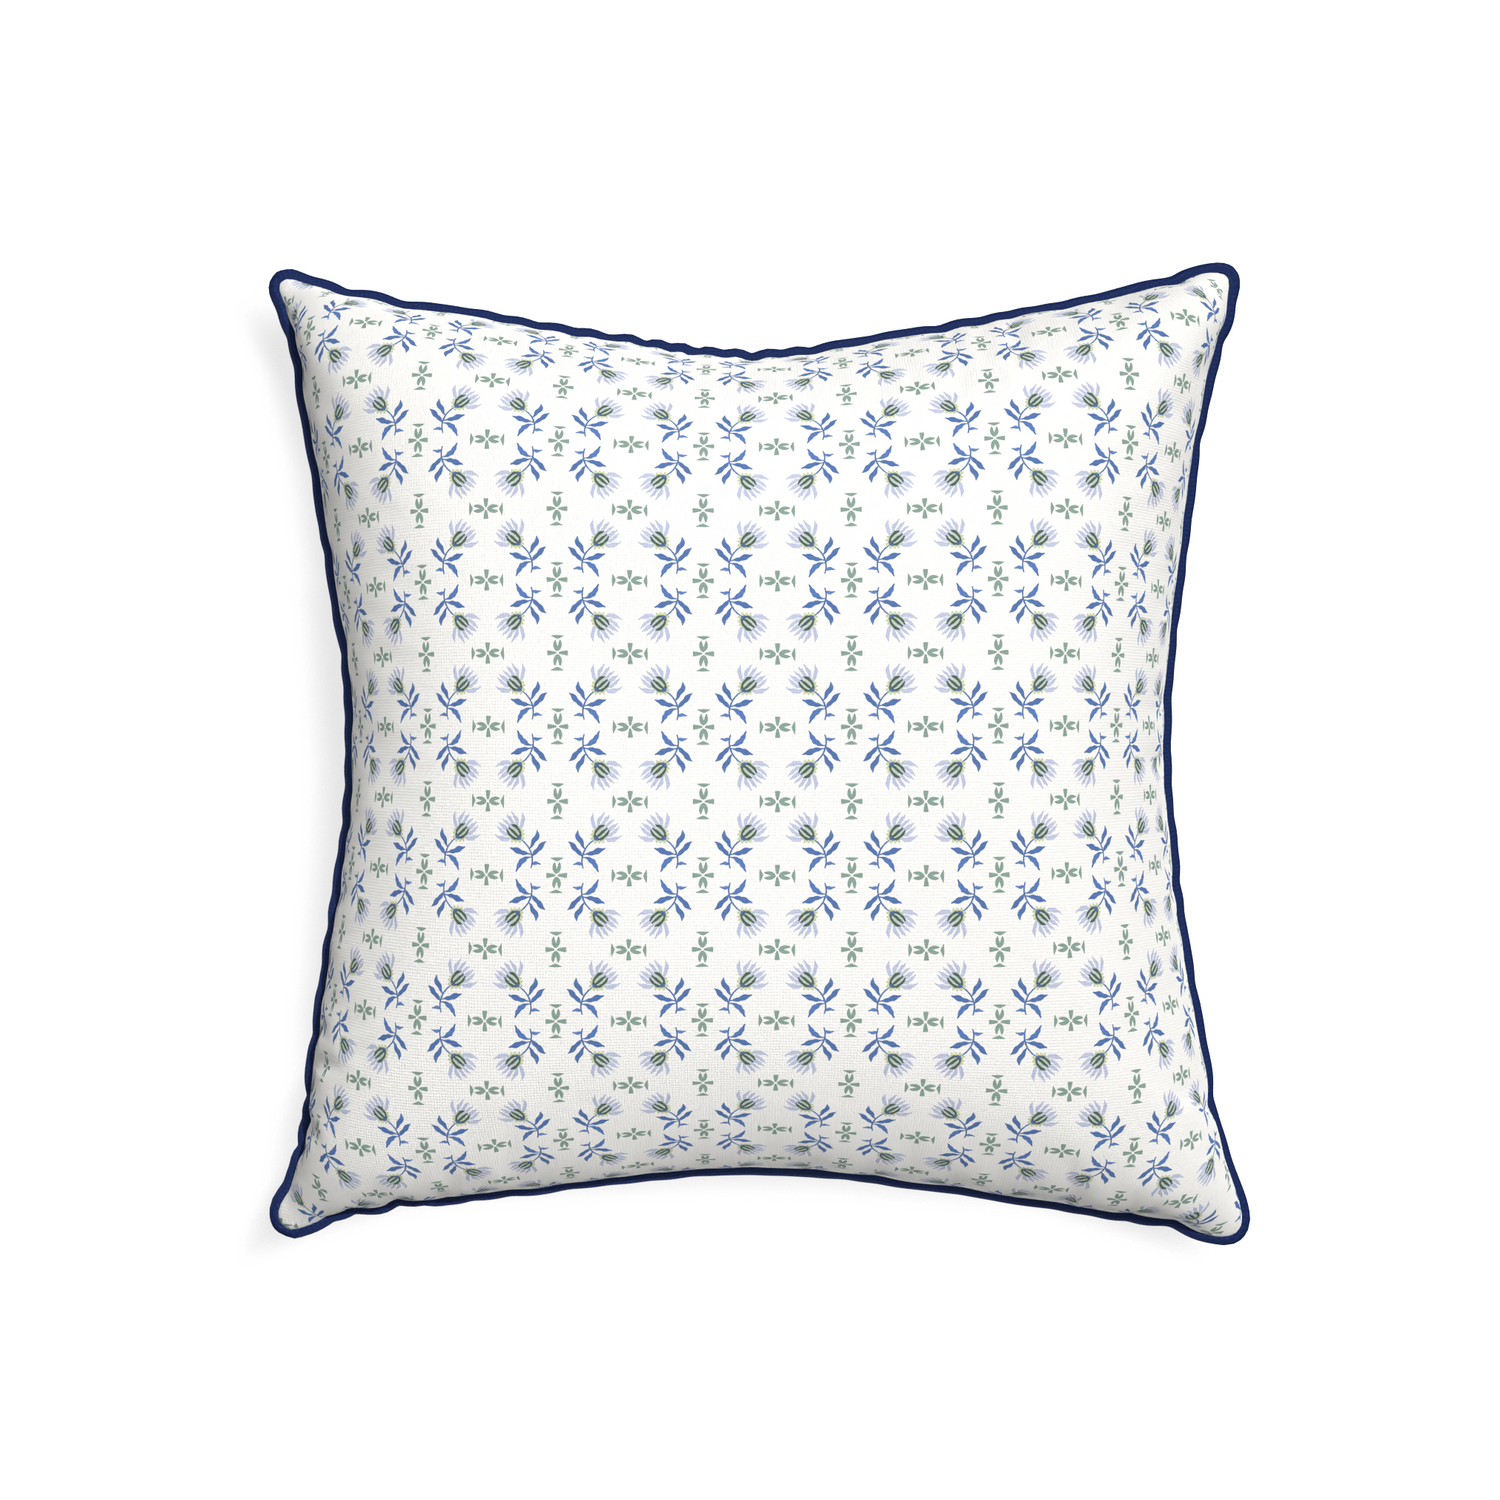 22-square lee custom blue & green floralpillow with midnight piping on white background